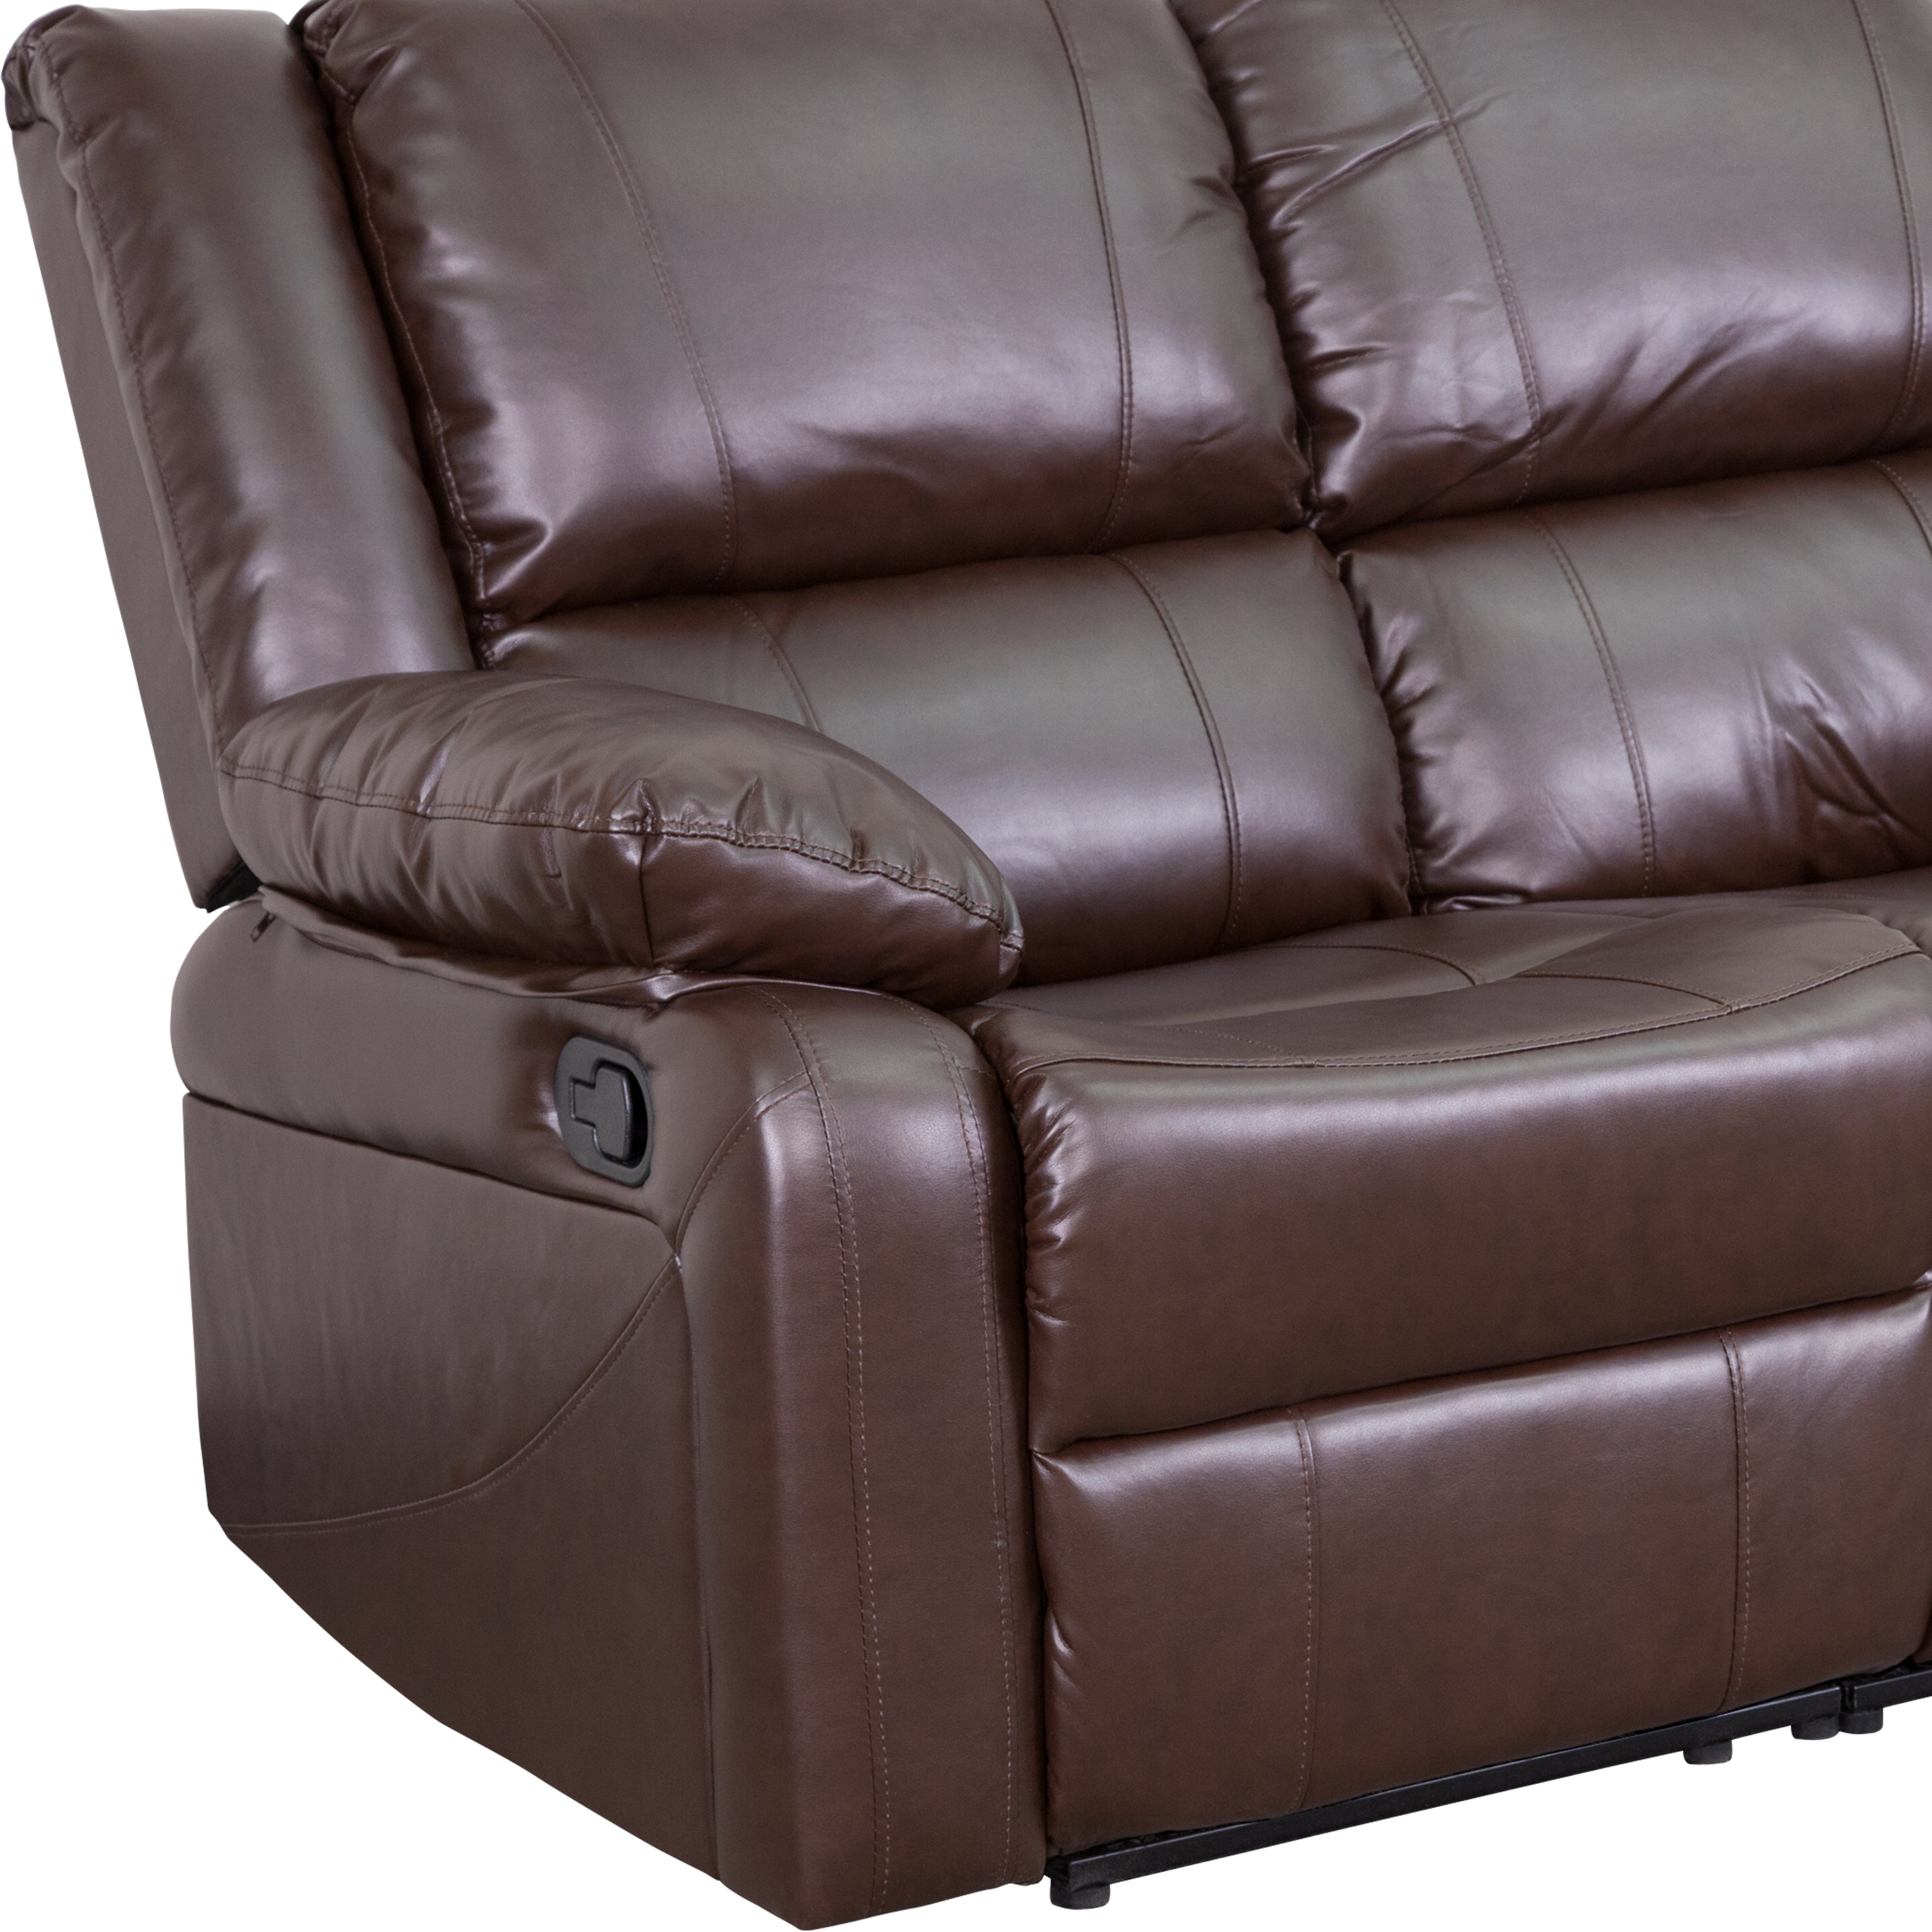 Harmony Series Loveseat with Two Built-In Recliners-Loveseat-Flash Furniture-Wall2Wall Furnishings